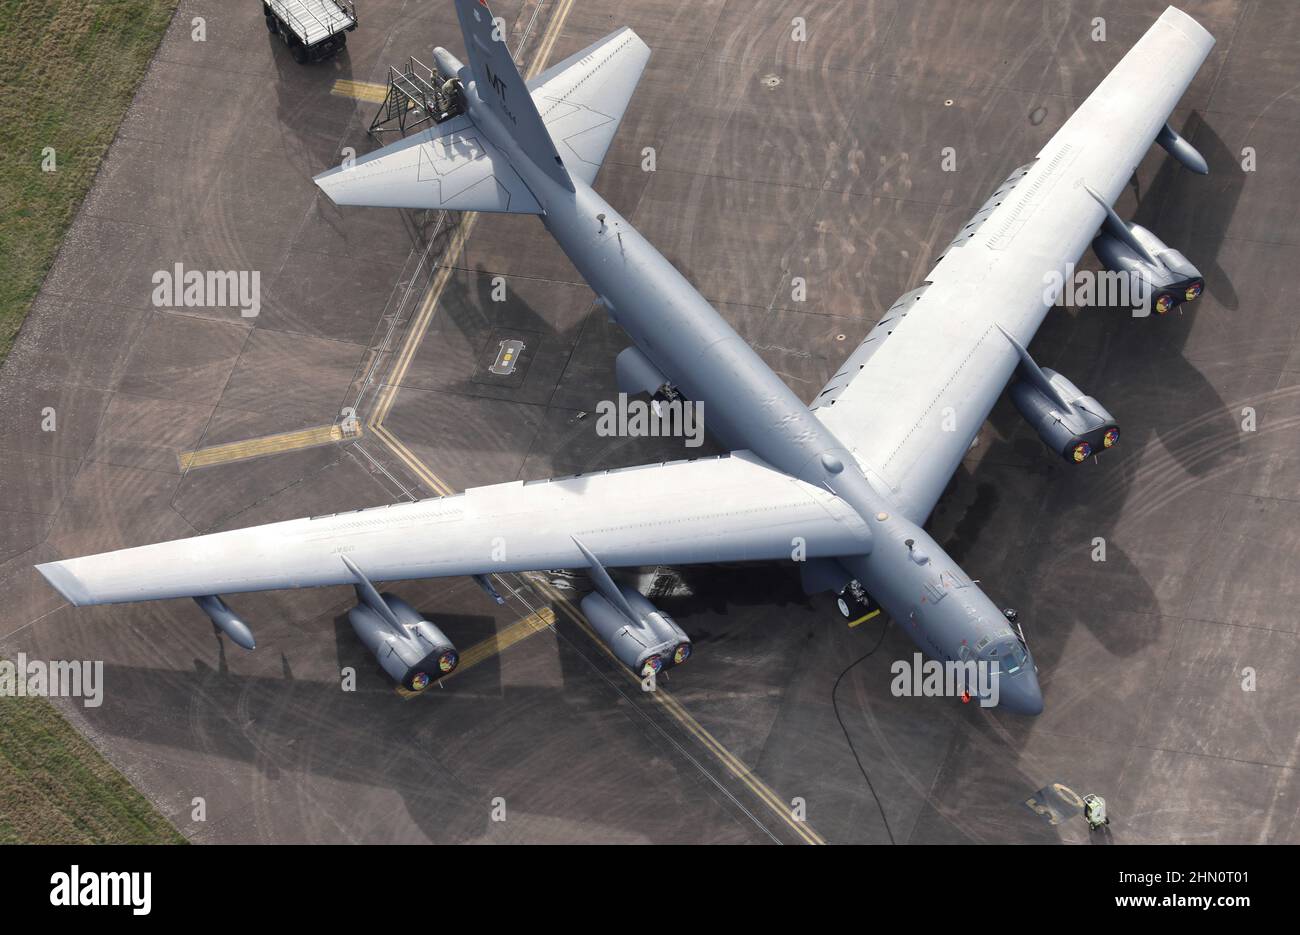 Aerial photograph of USAF Boeing B-52 soon after the arrival of 4 bombers at RAF Fairford near Cirencester in the U.K. as tension in Ukraine mounts. Stock Photo